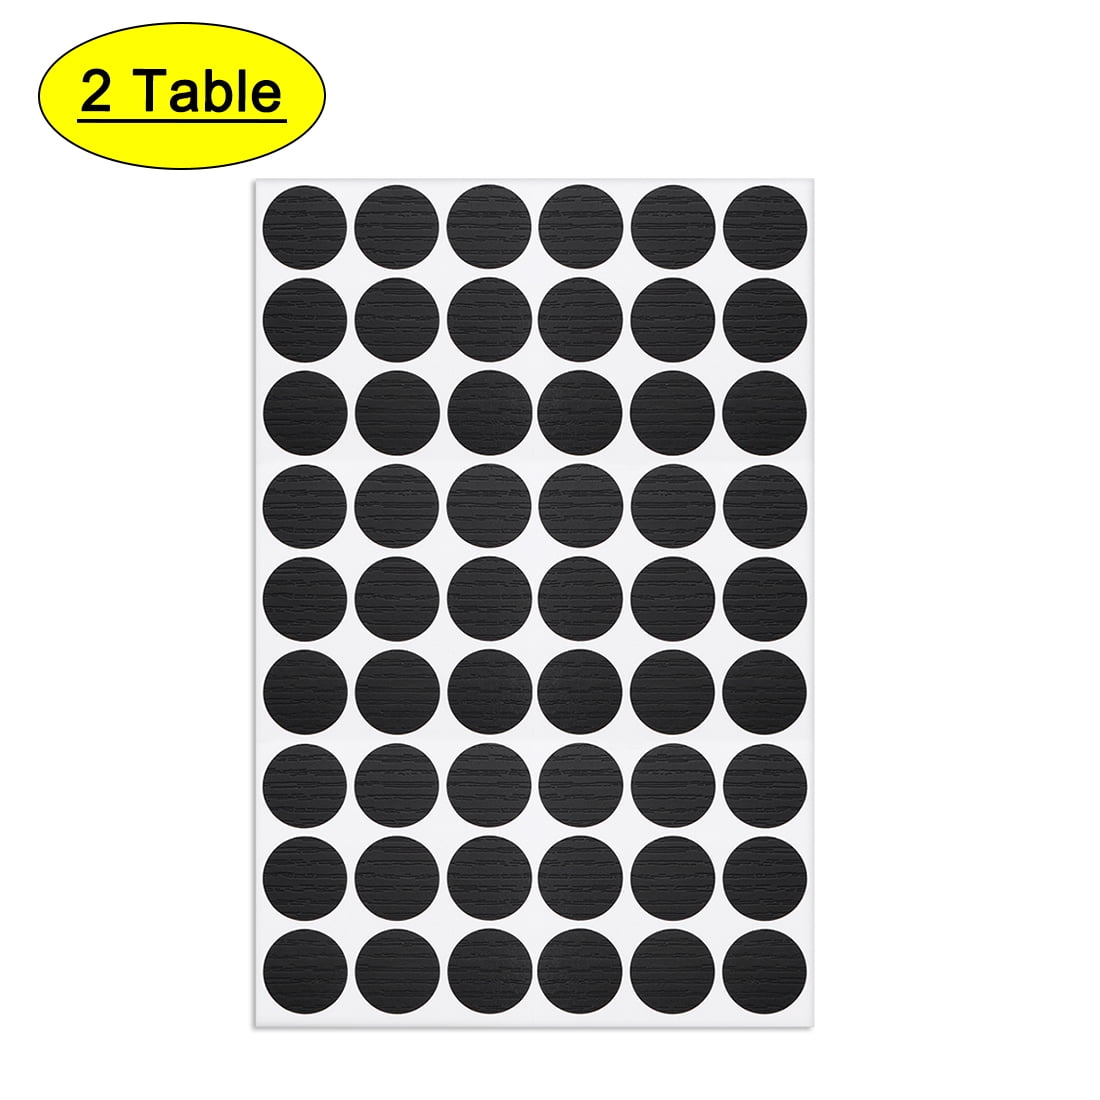 ZXUEZHENG Self-Adhesive Screw Hole Stickers,2-Table 96 in 1 Self-Adhesive Screw Covers Caps Dustproof Sticker 15mm White 